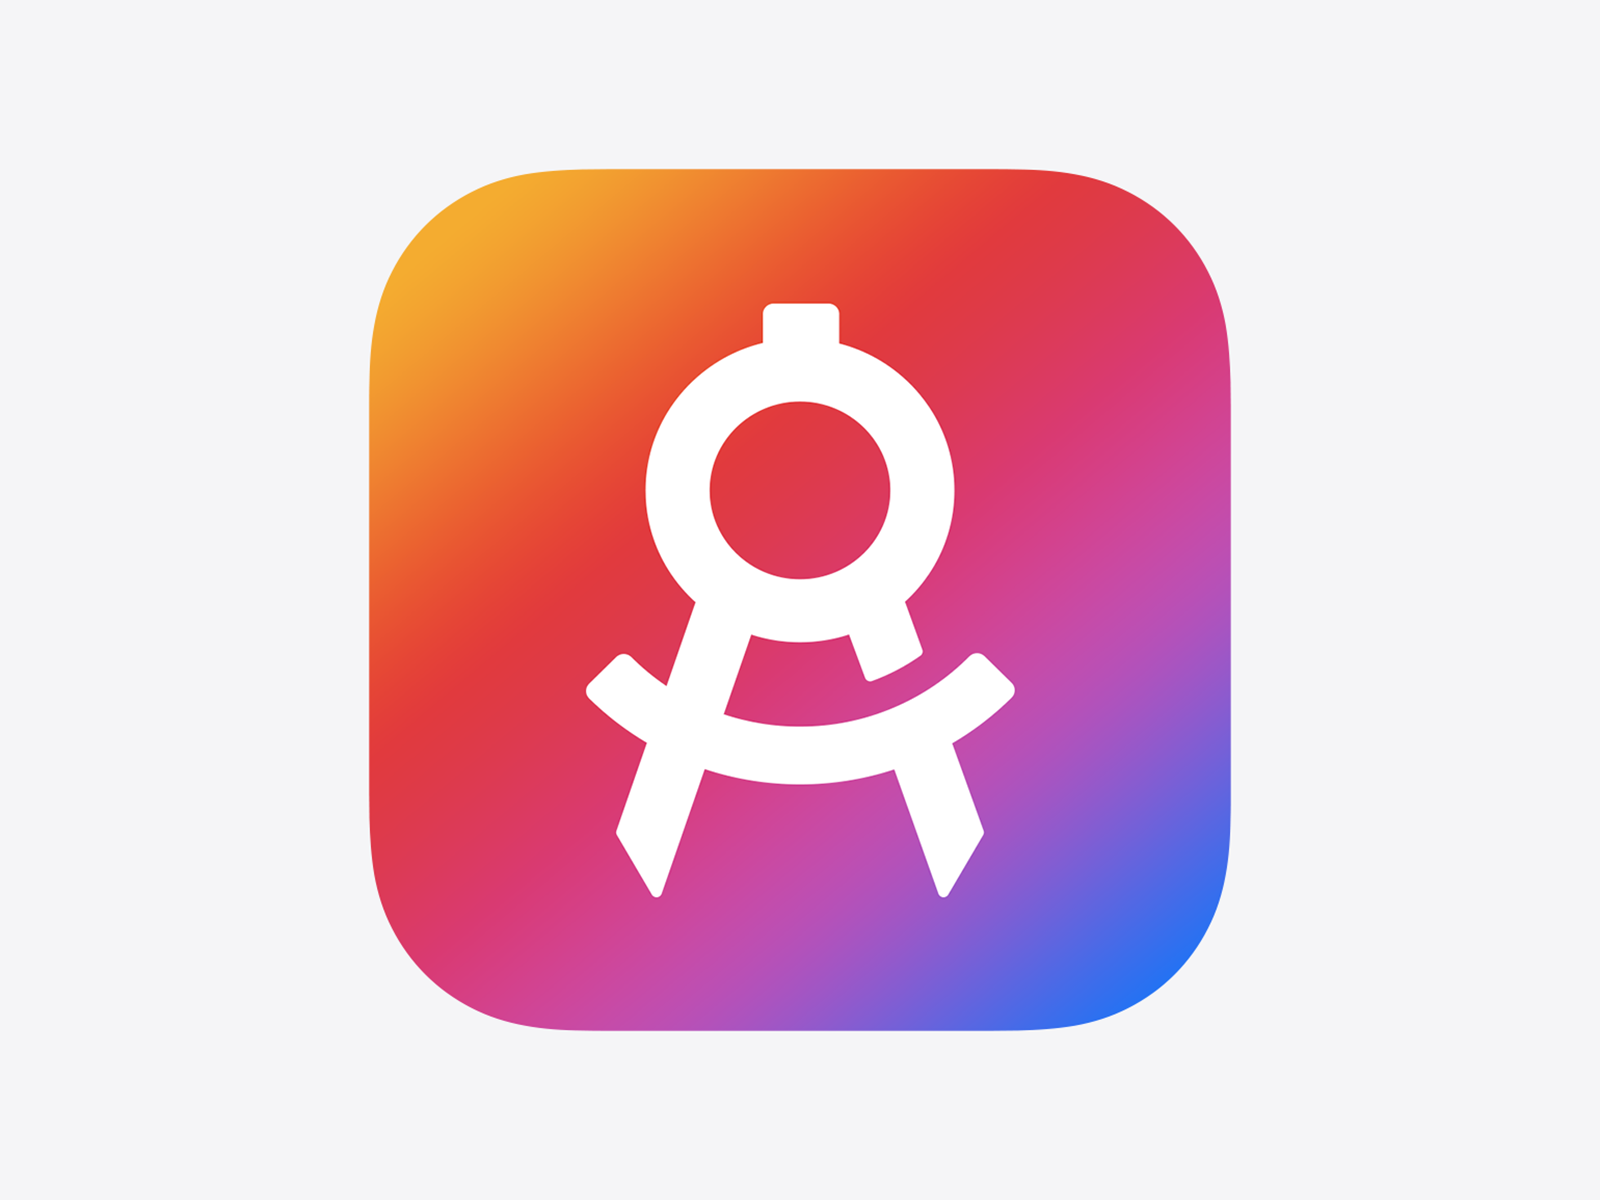 Ios 14 App Icon By Anders Bothmann For Apply Pixels On Dribbble - roblox app icon ios 14